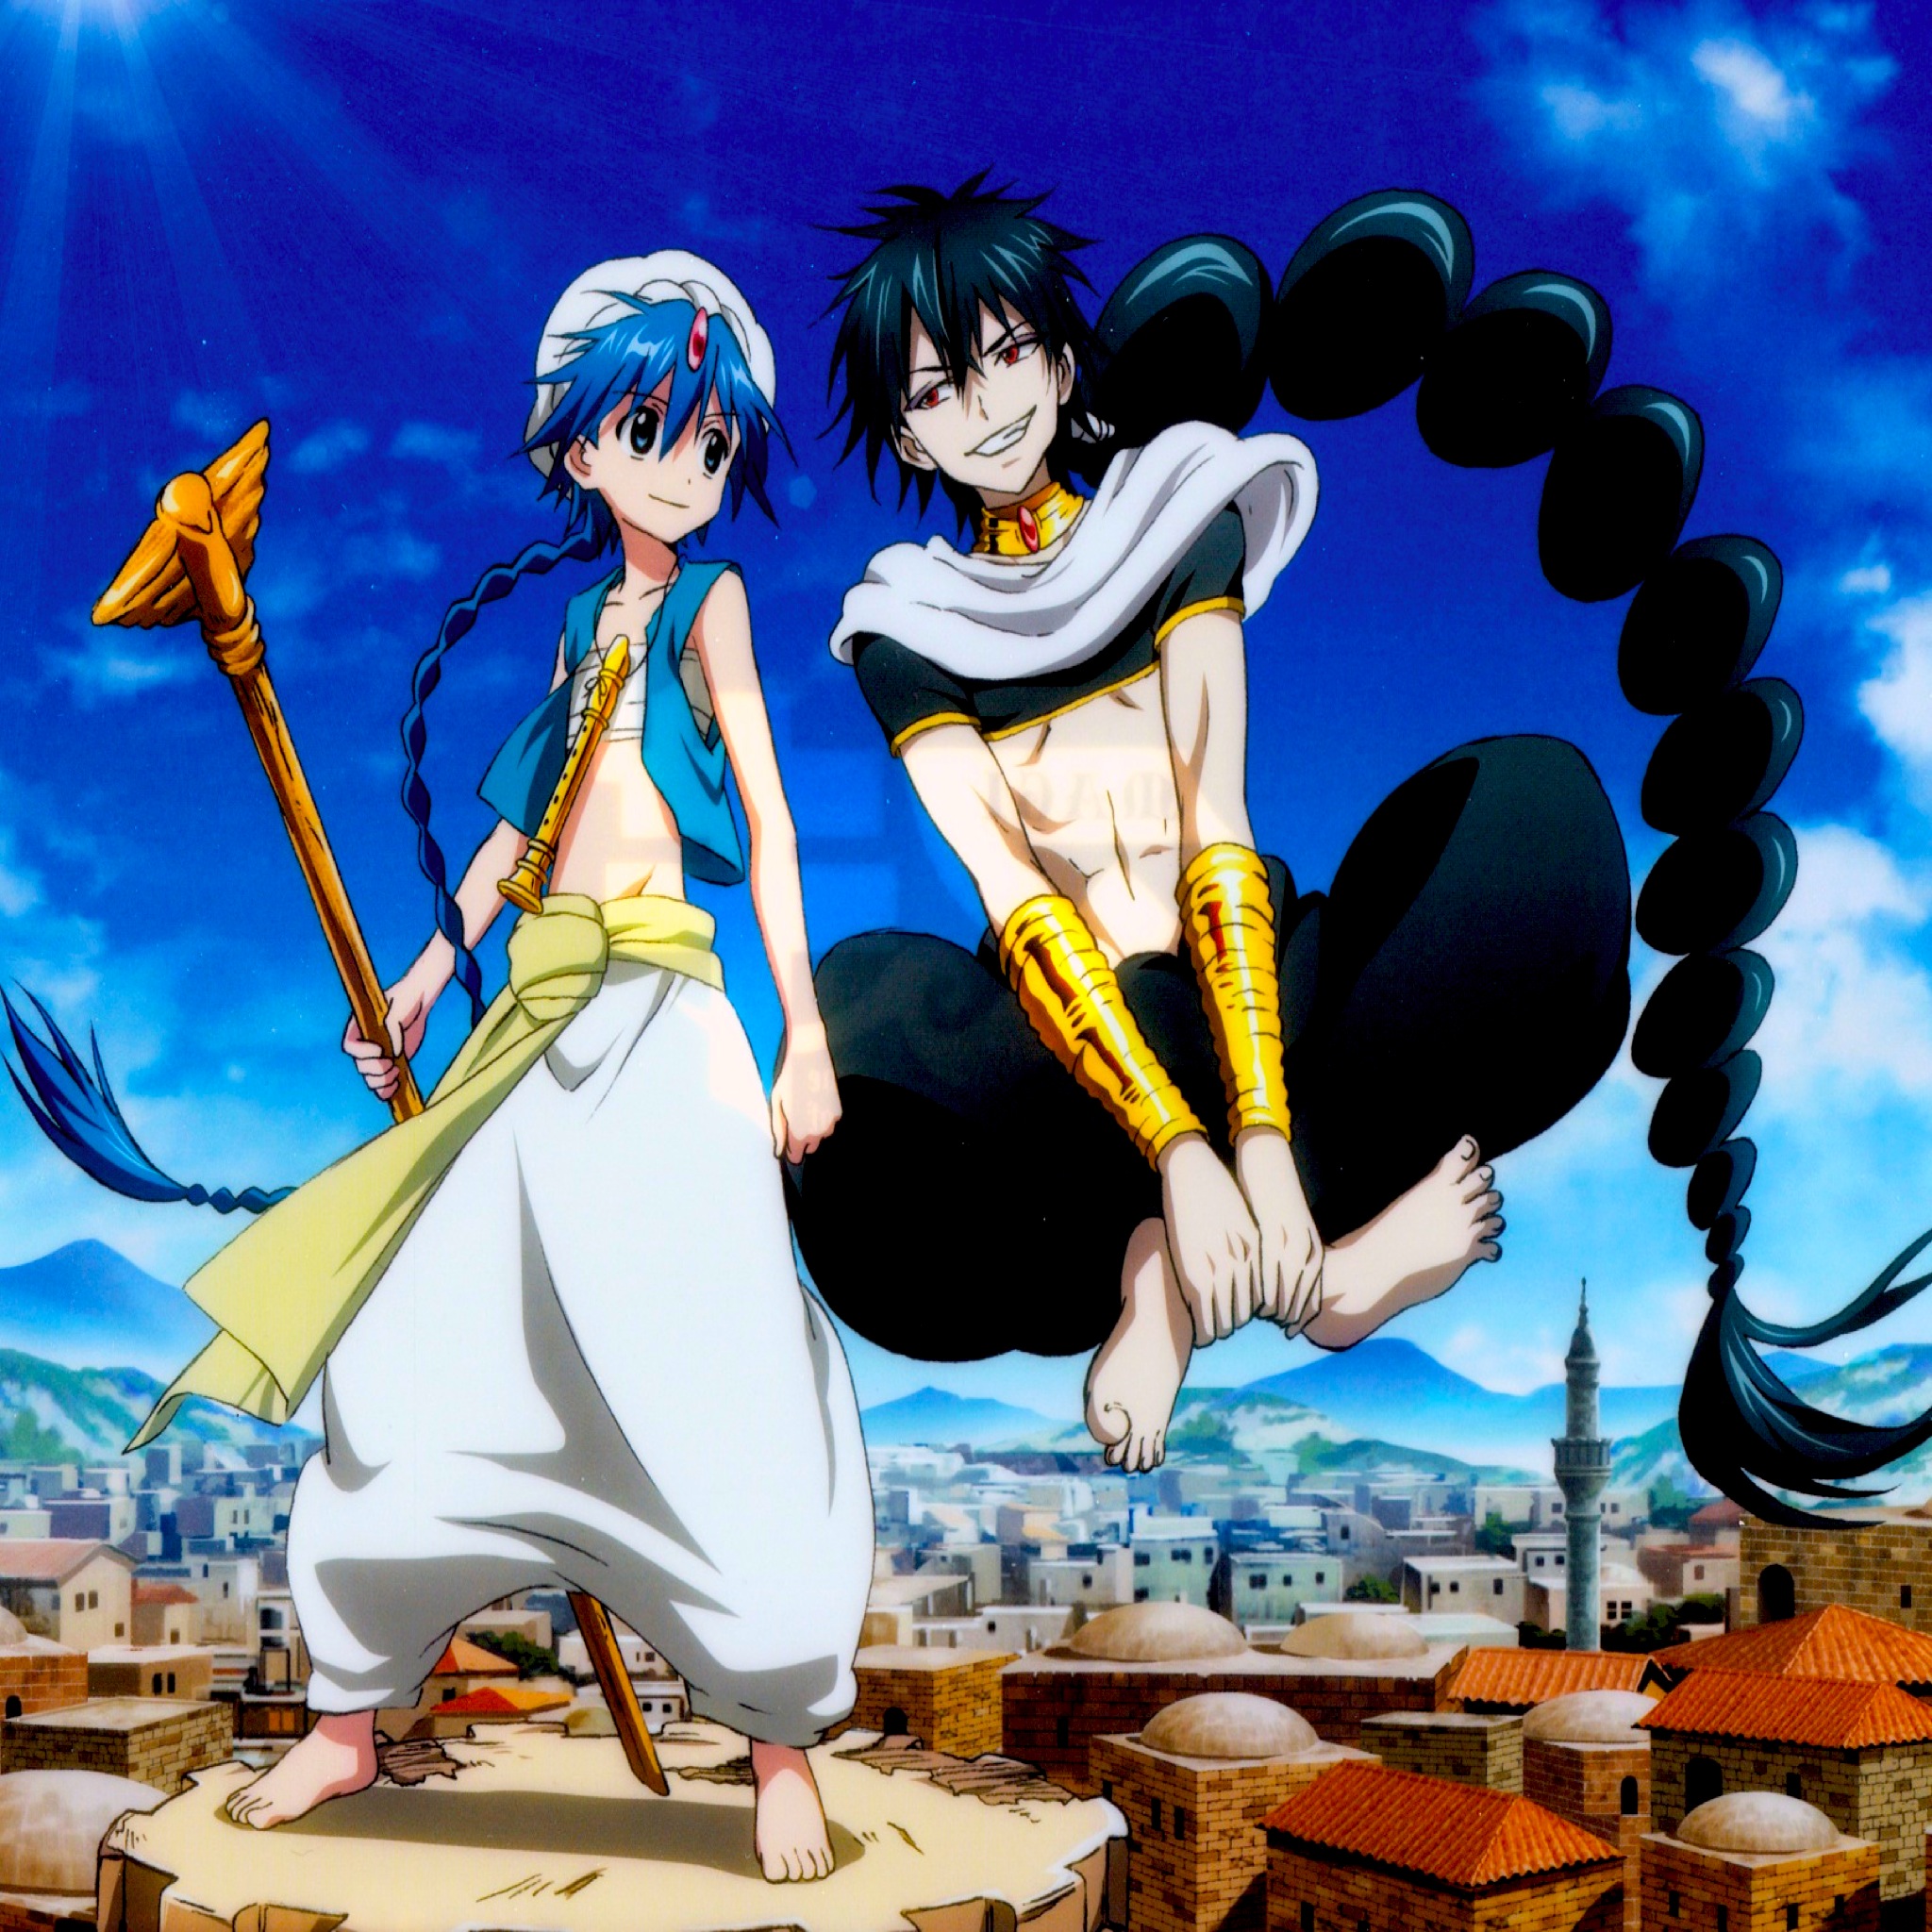 The Two Magi